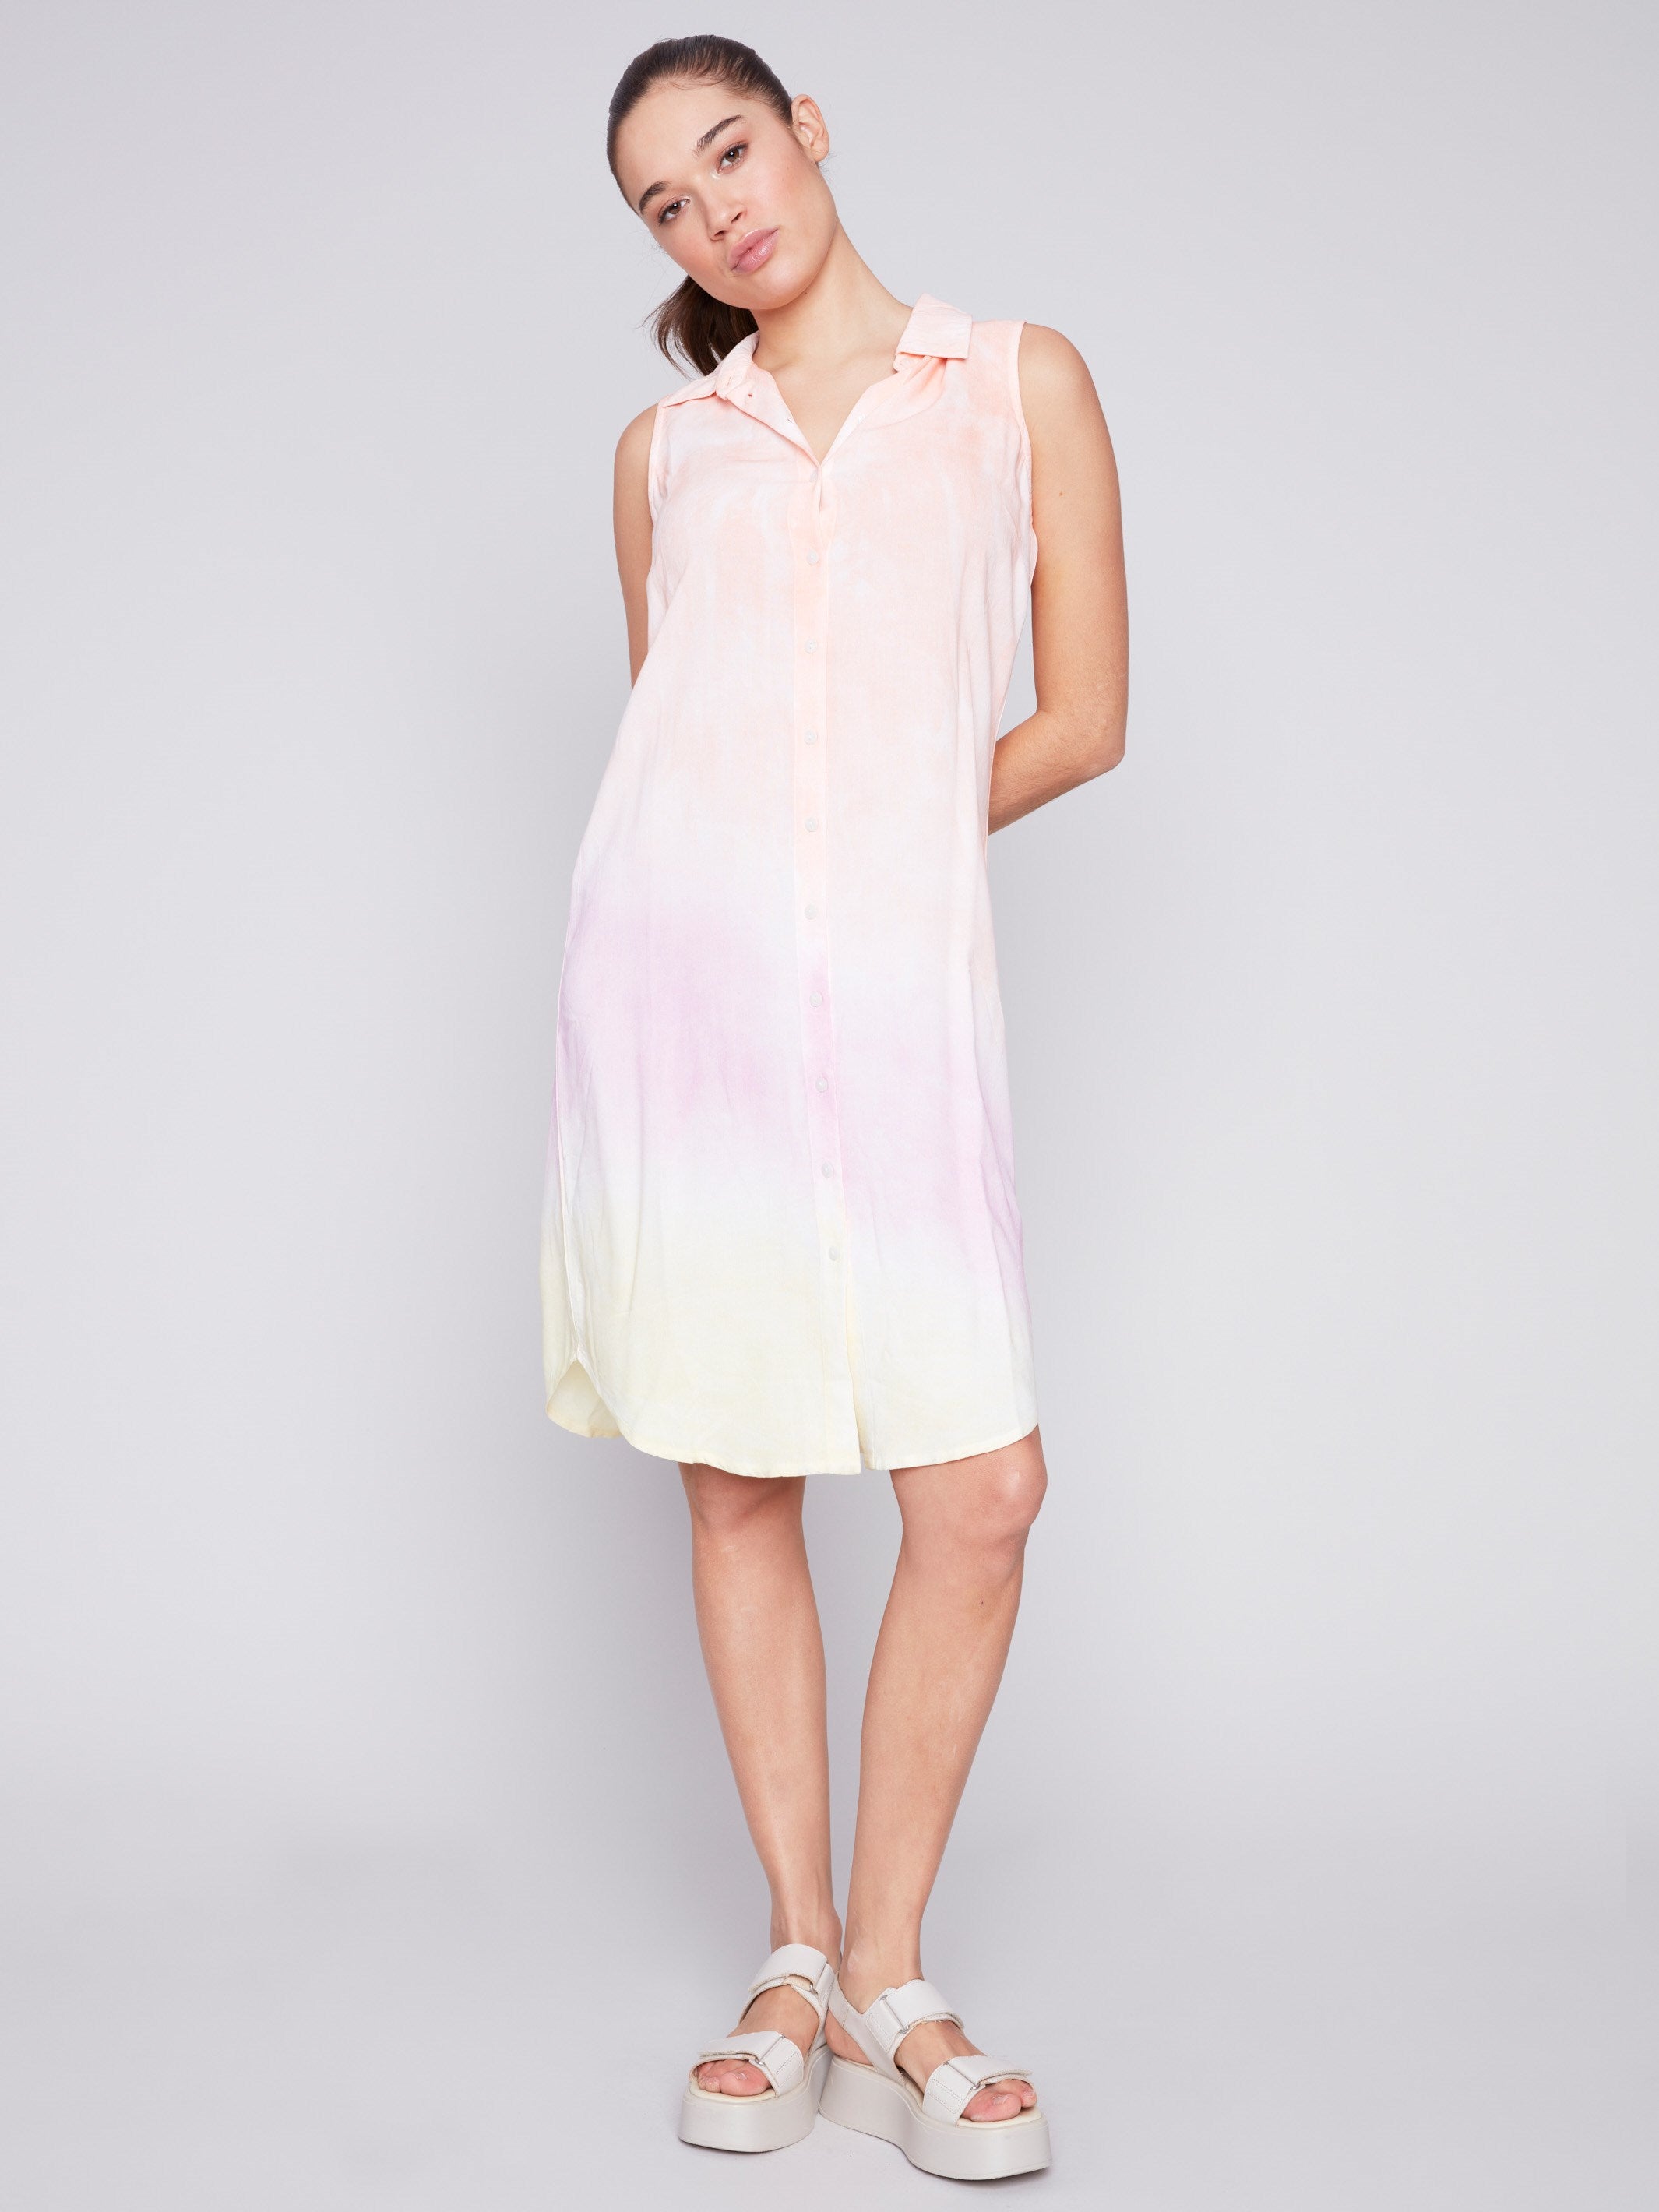 Tie-Dye Sleeveless Button-Front Dress - Dawn - Charlie B Collection Canada - Image 1